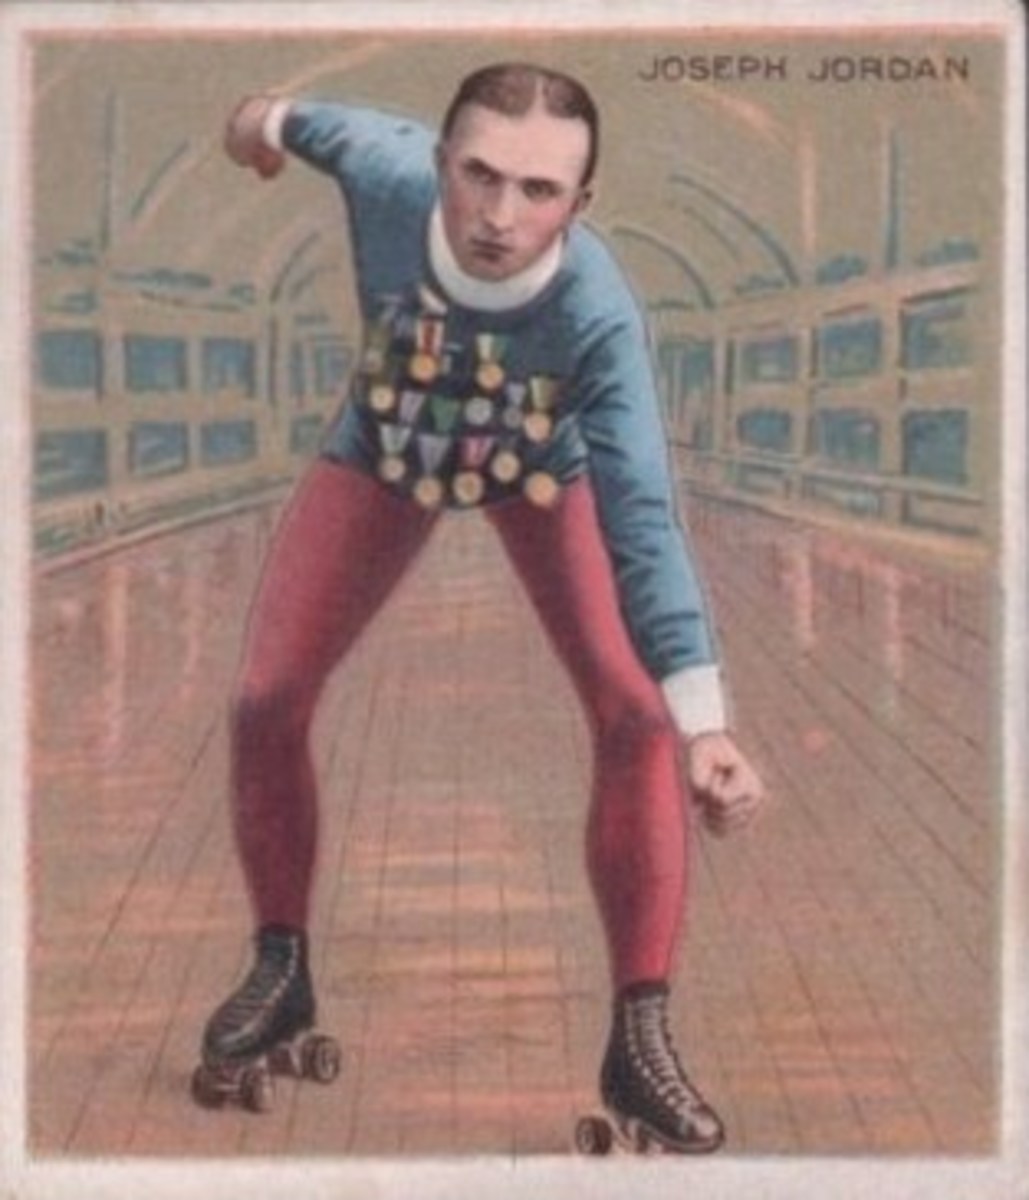 Roller skater Joseph Jordan apparently liked to wear his medals when he went out for a roll.